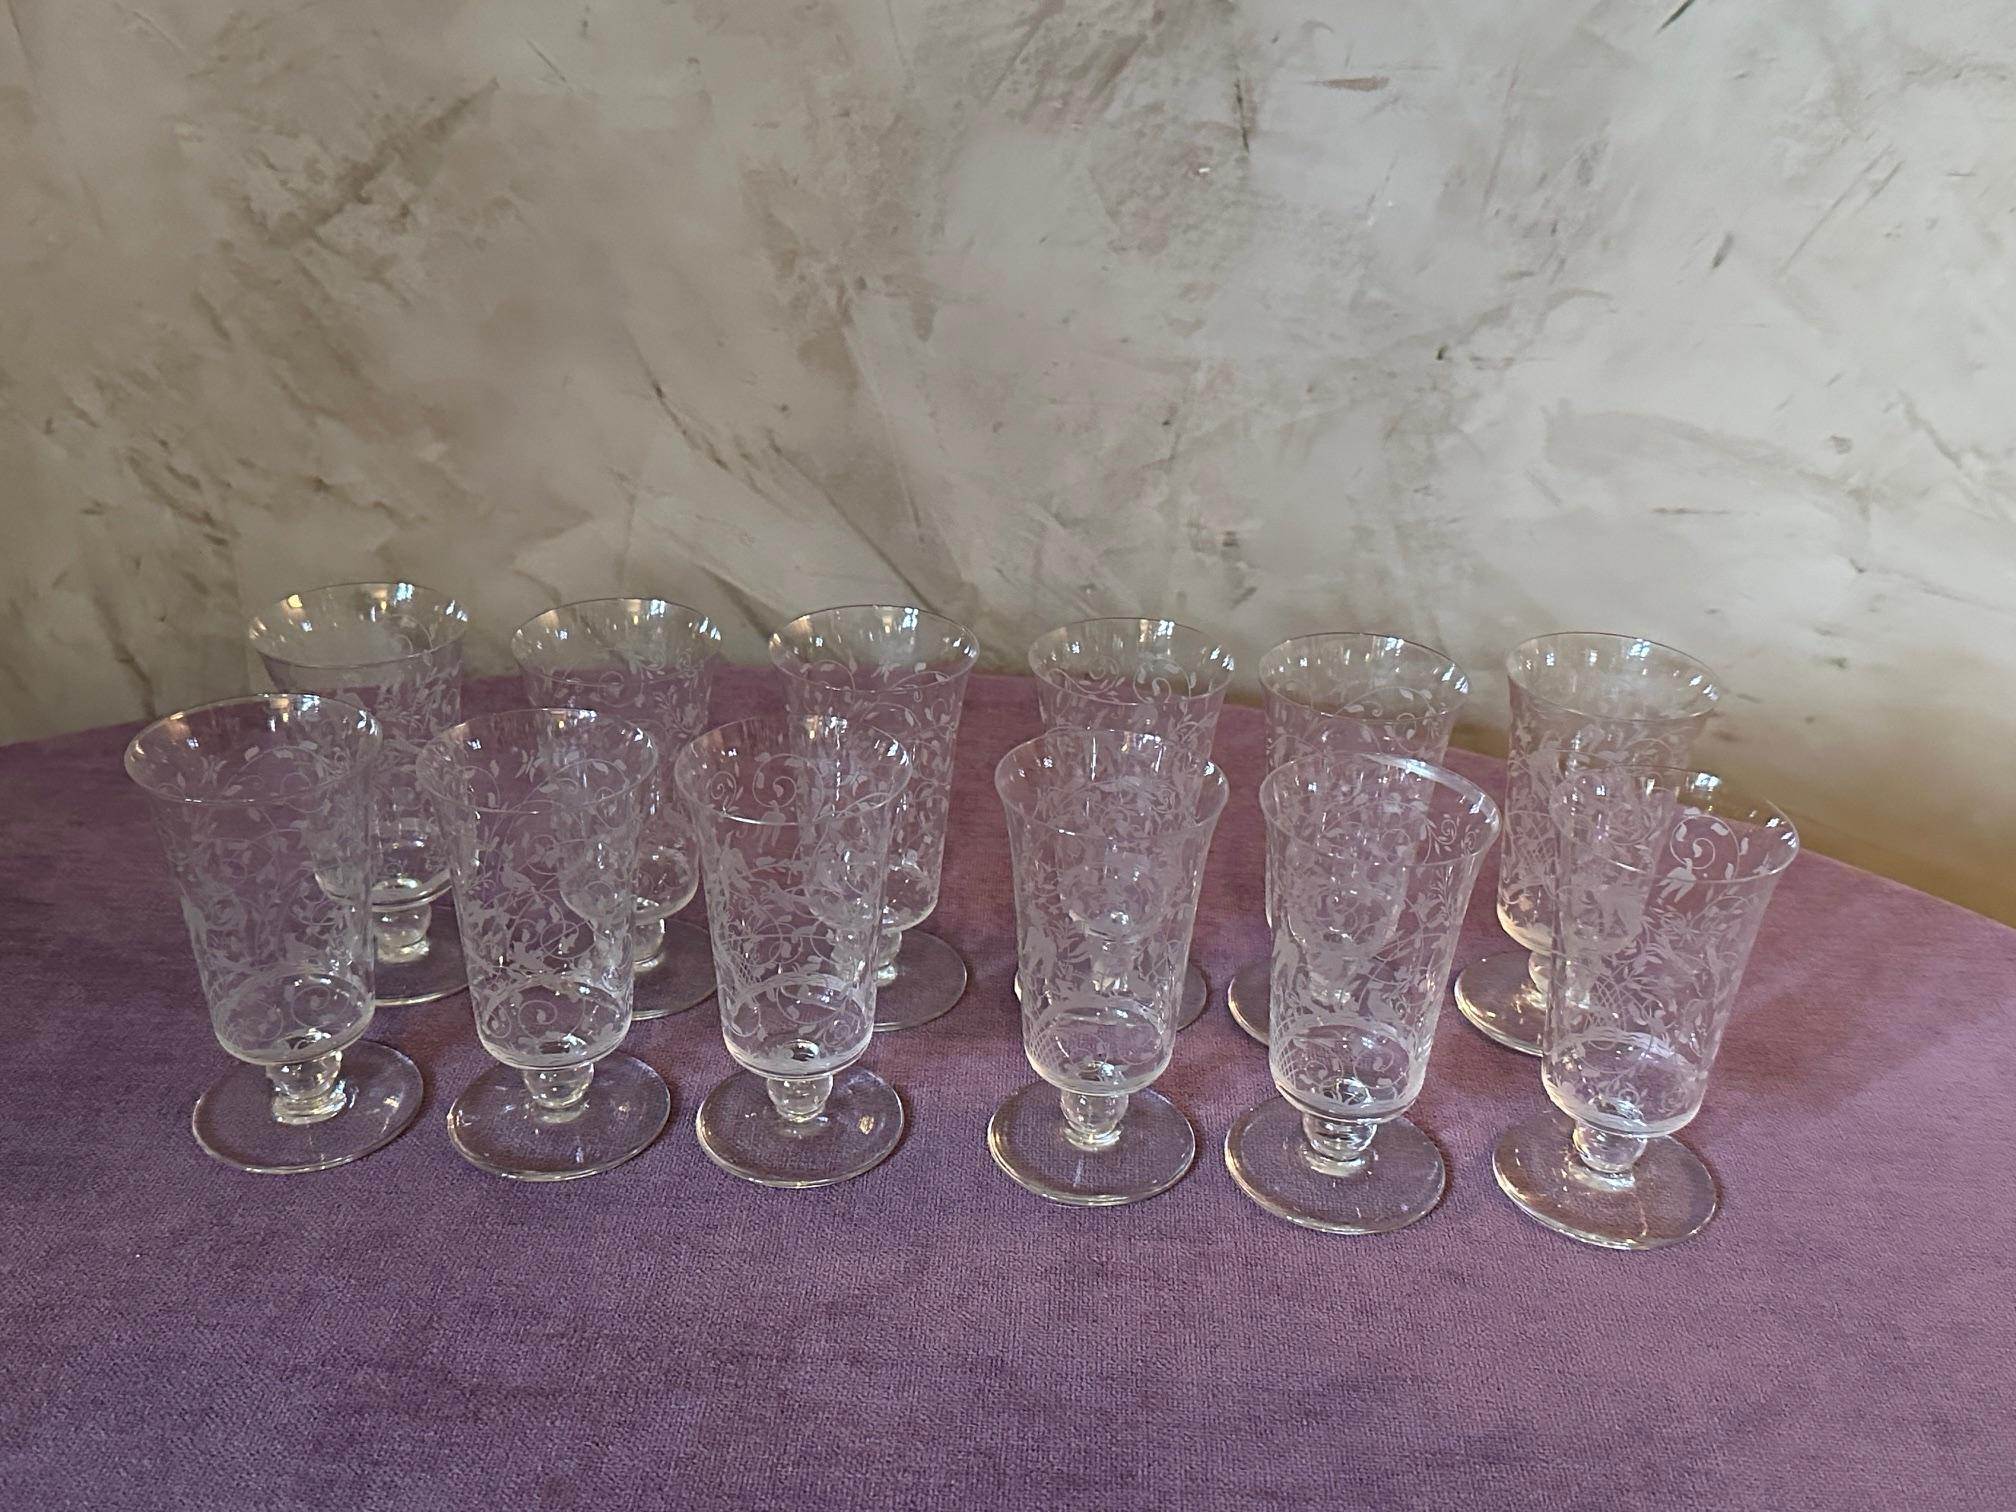 20th century French Set of Crystal Baccarat Glasses, Pitcher and Decanter For Sale 13